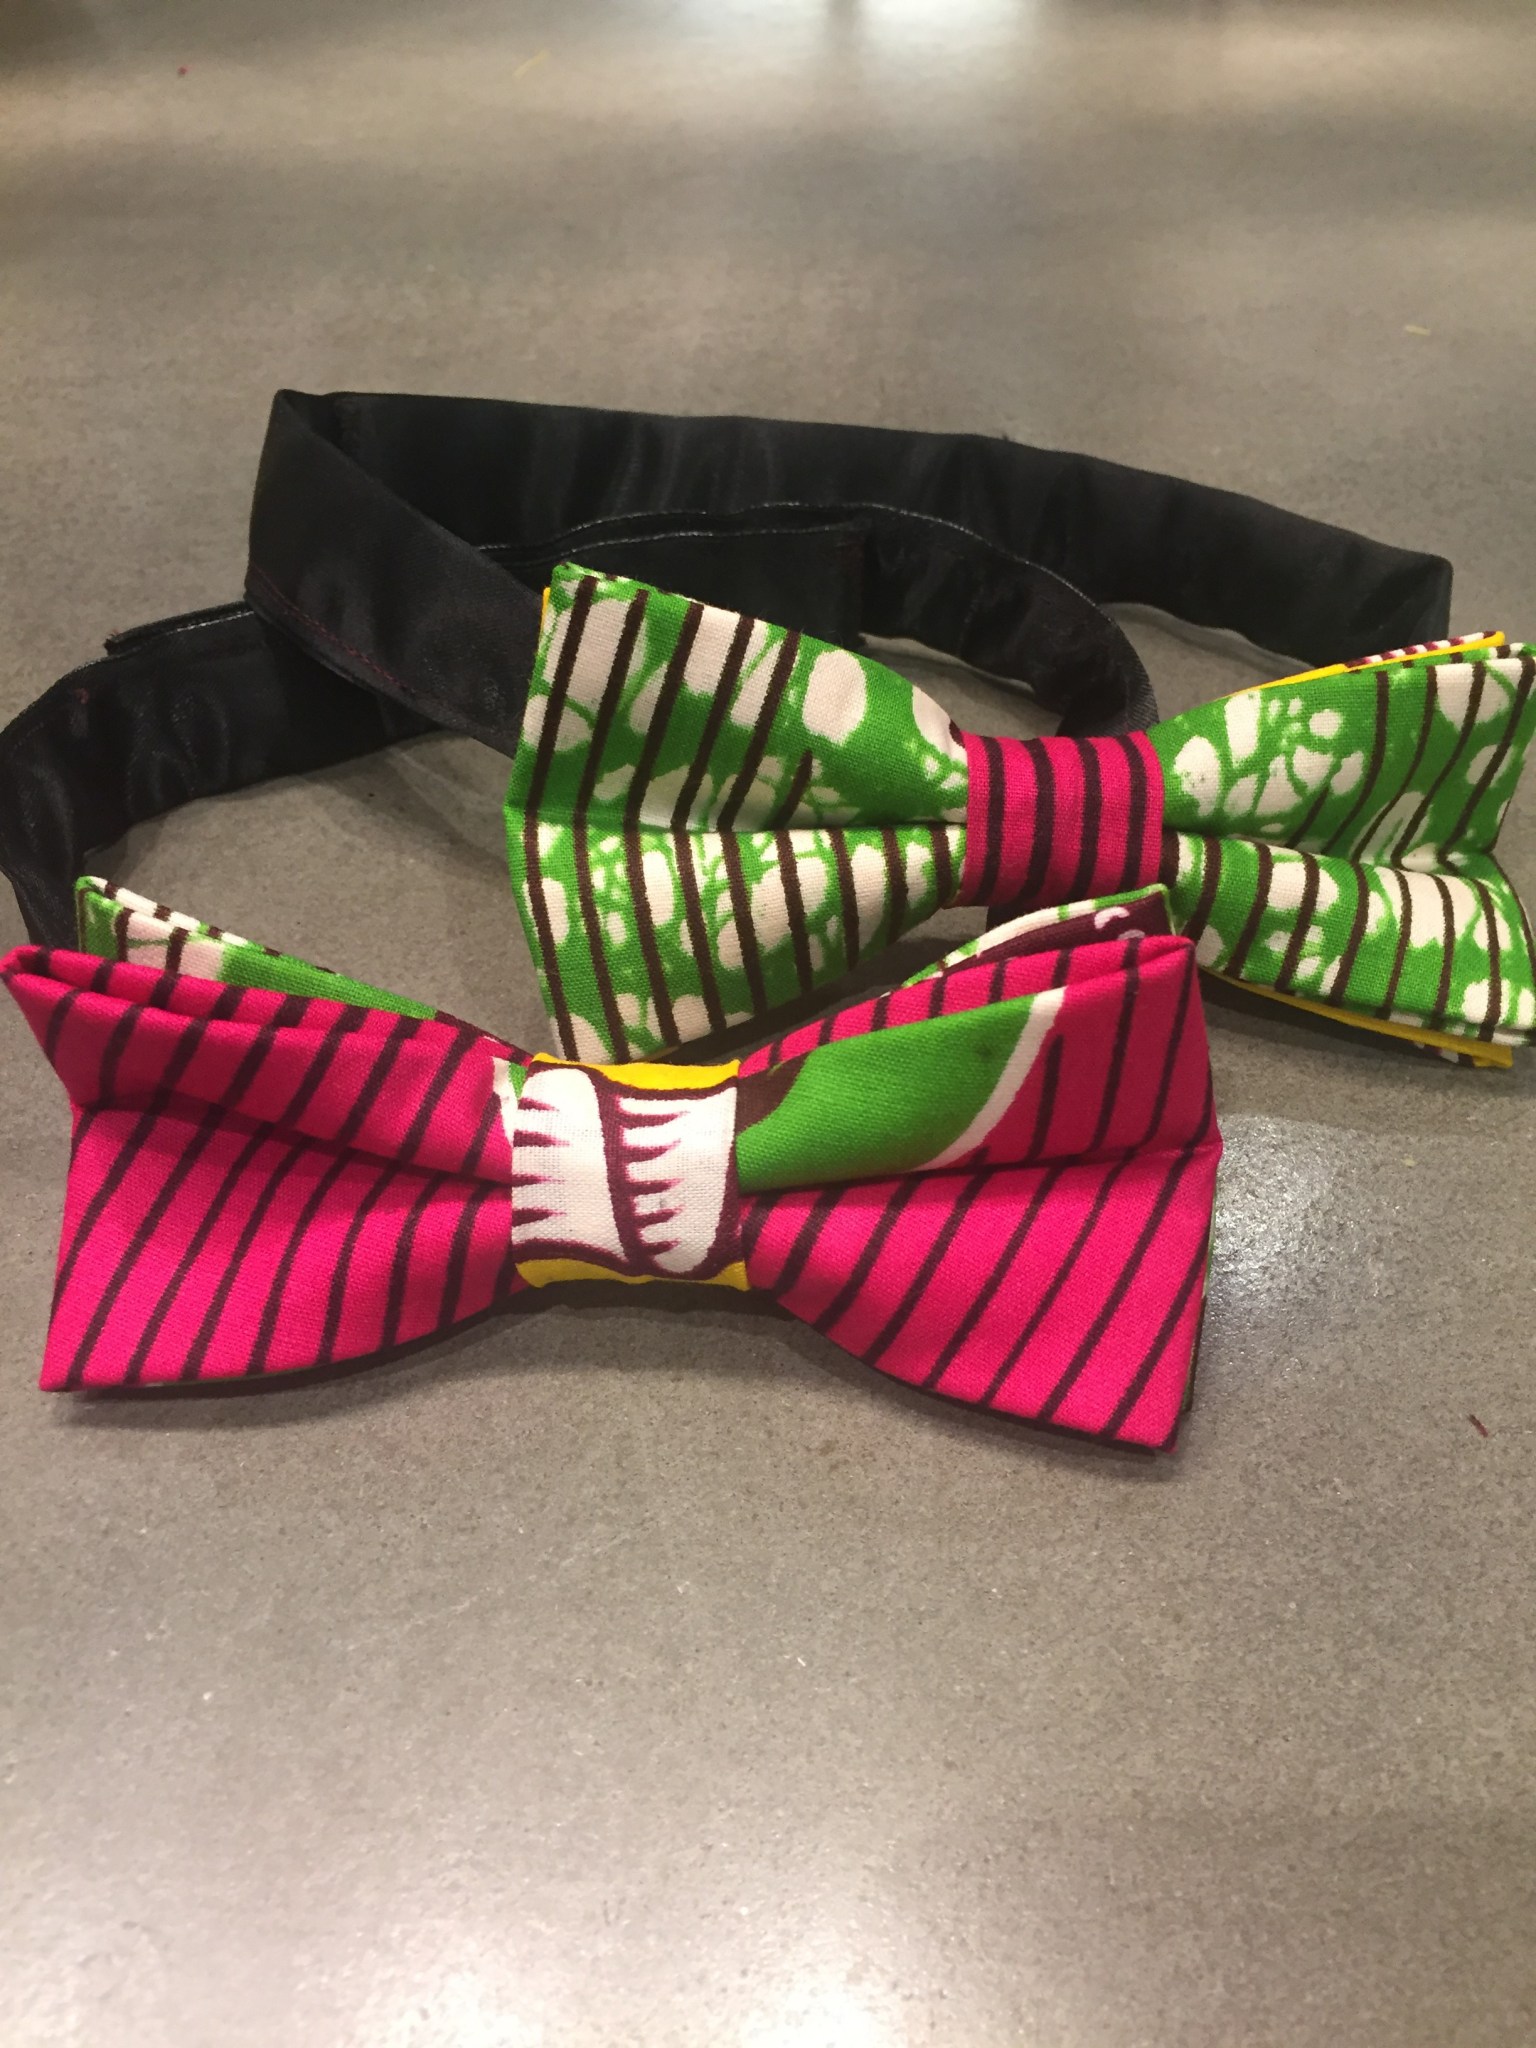 Green and pink bow ties.